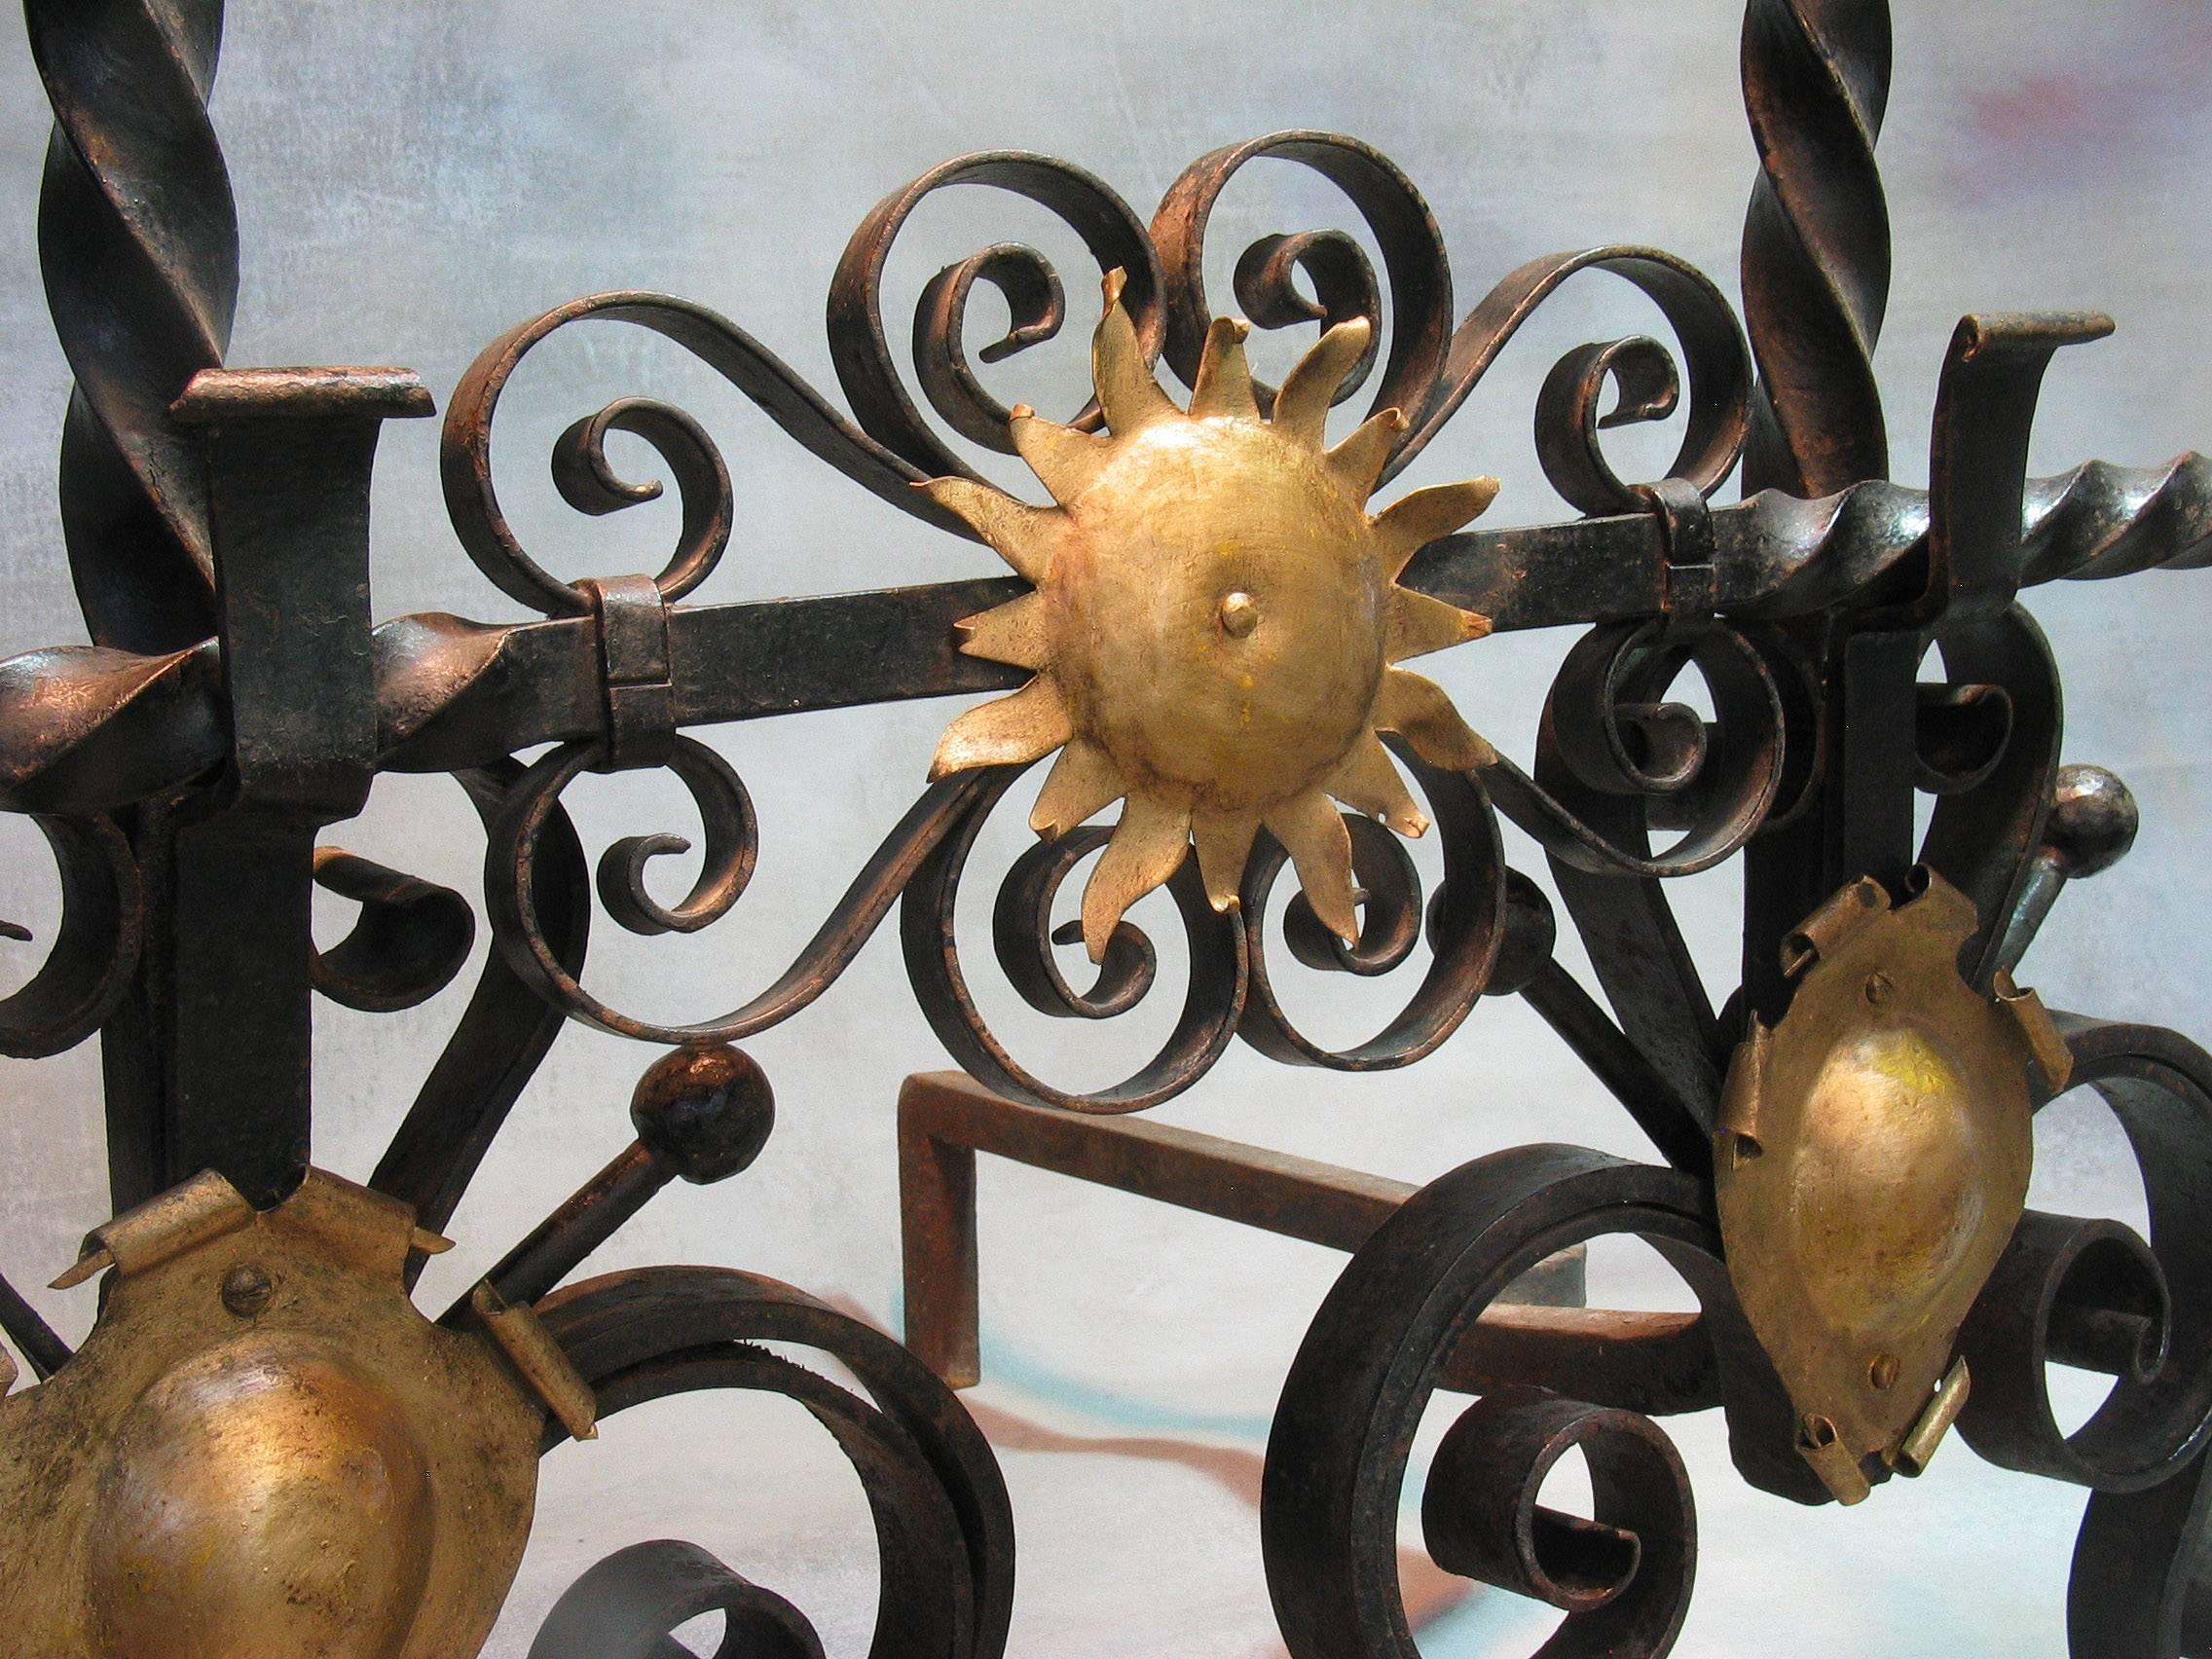 A pair of large Cannonball top wrought iron Andirons 19th century with cannonball tops on central twist stems supported by ornate scroll work feet with blind gilt metal crests, together with twist-turned cross bar ending with a ball on turned ends